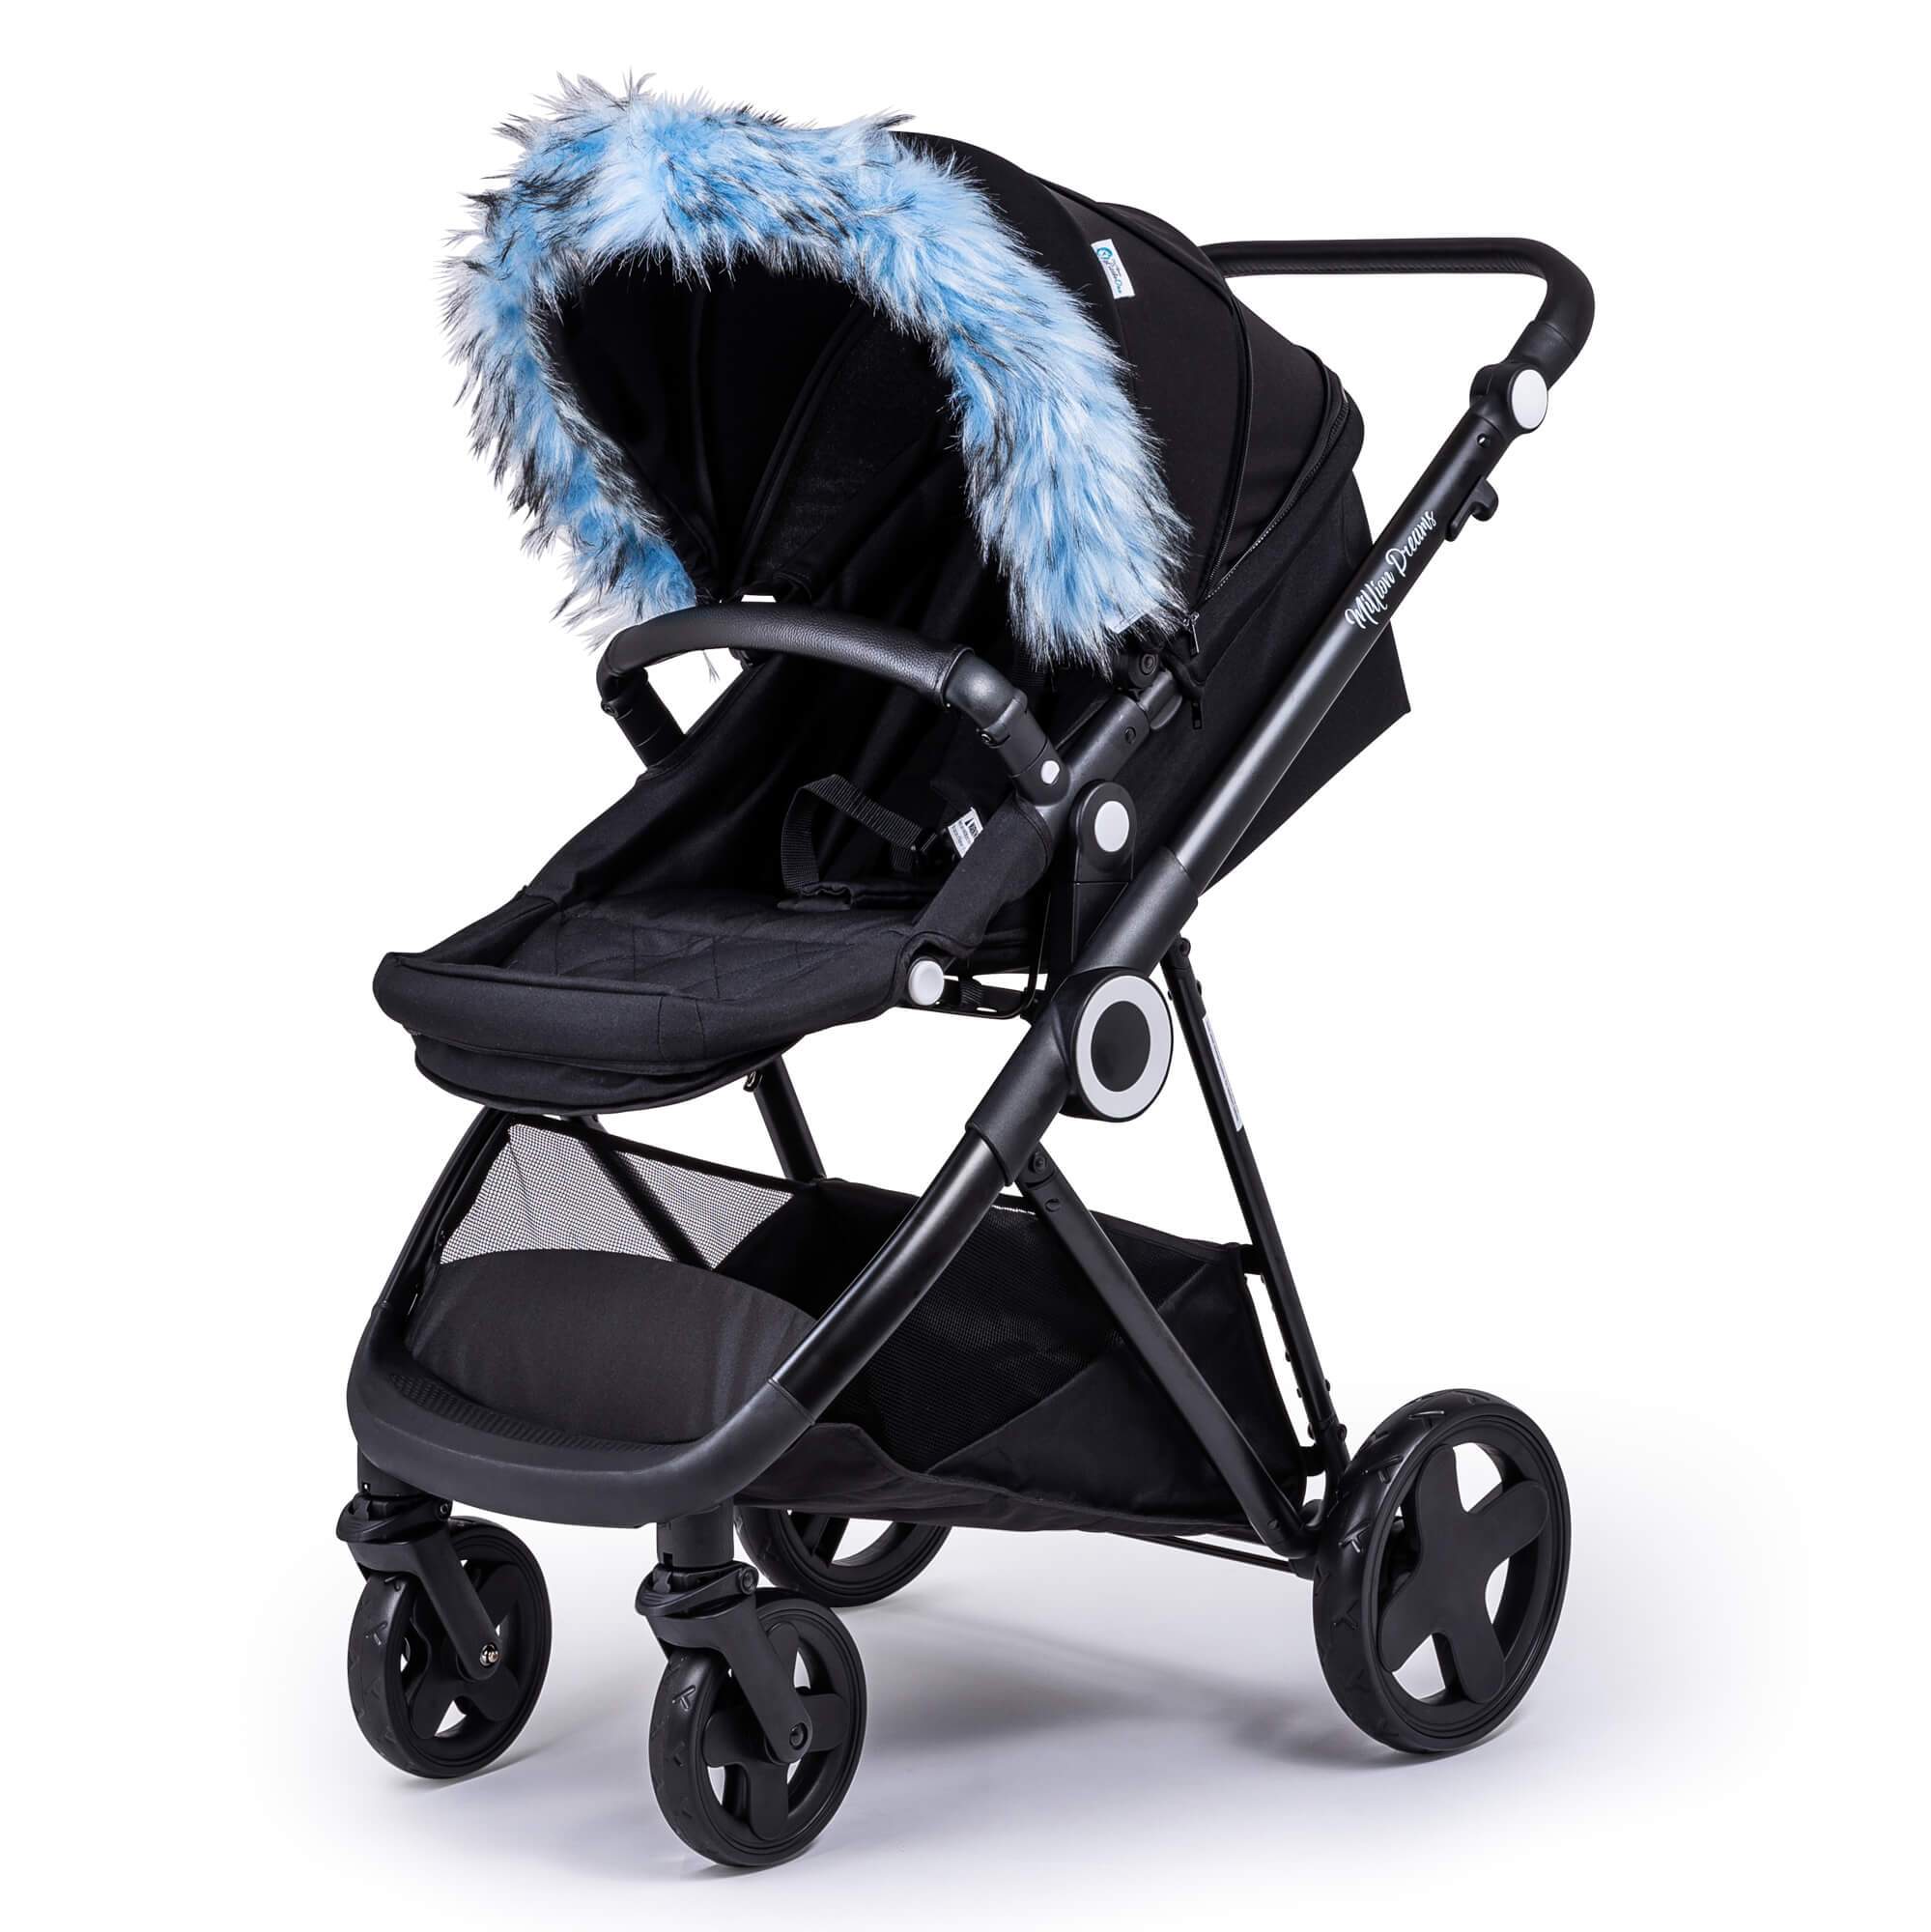 Pram Fur Hood Trim Attachment for Pushchair Compatible with Norton - For Your Little One